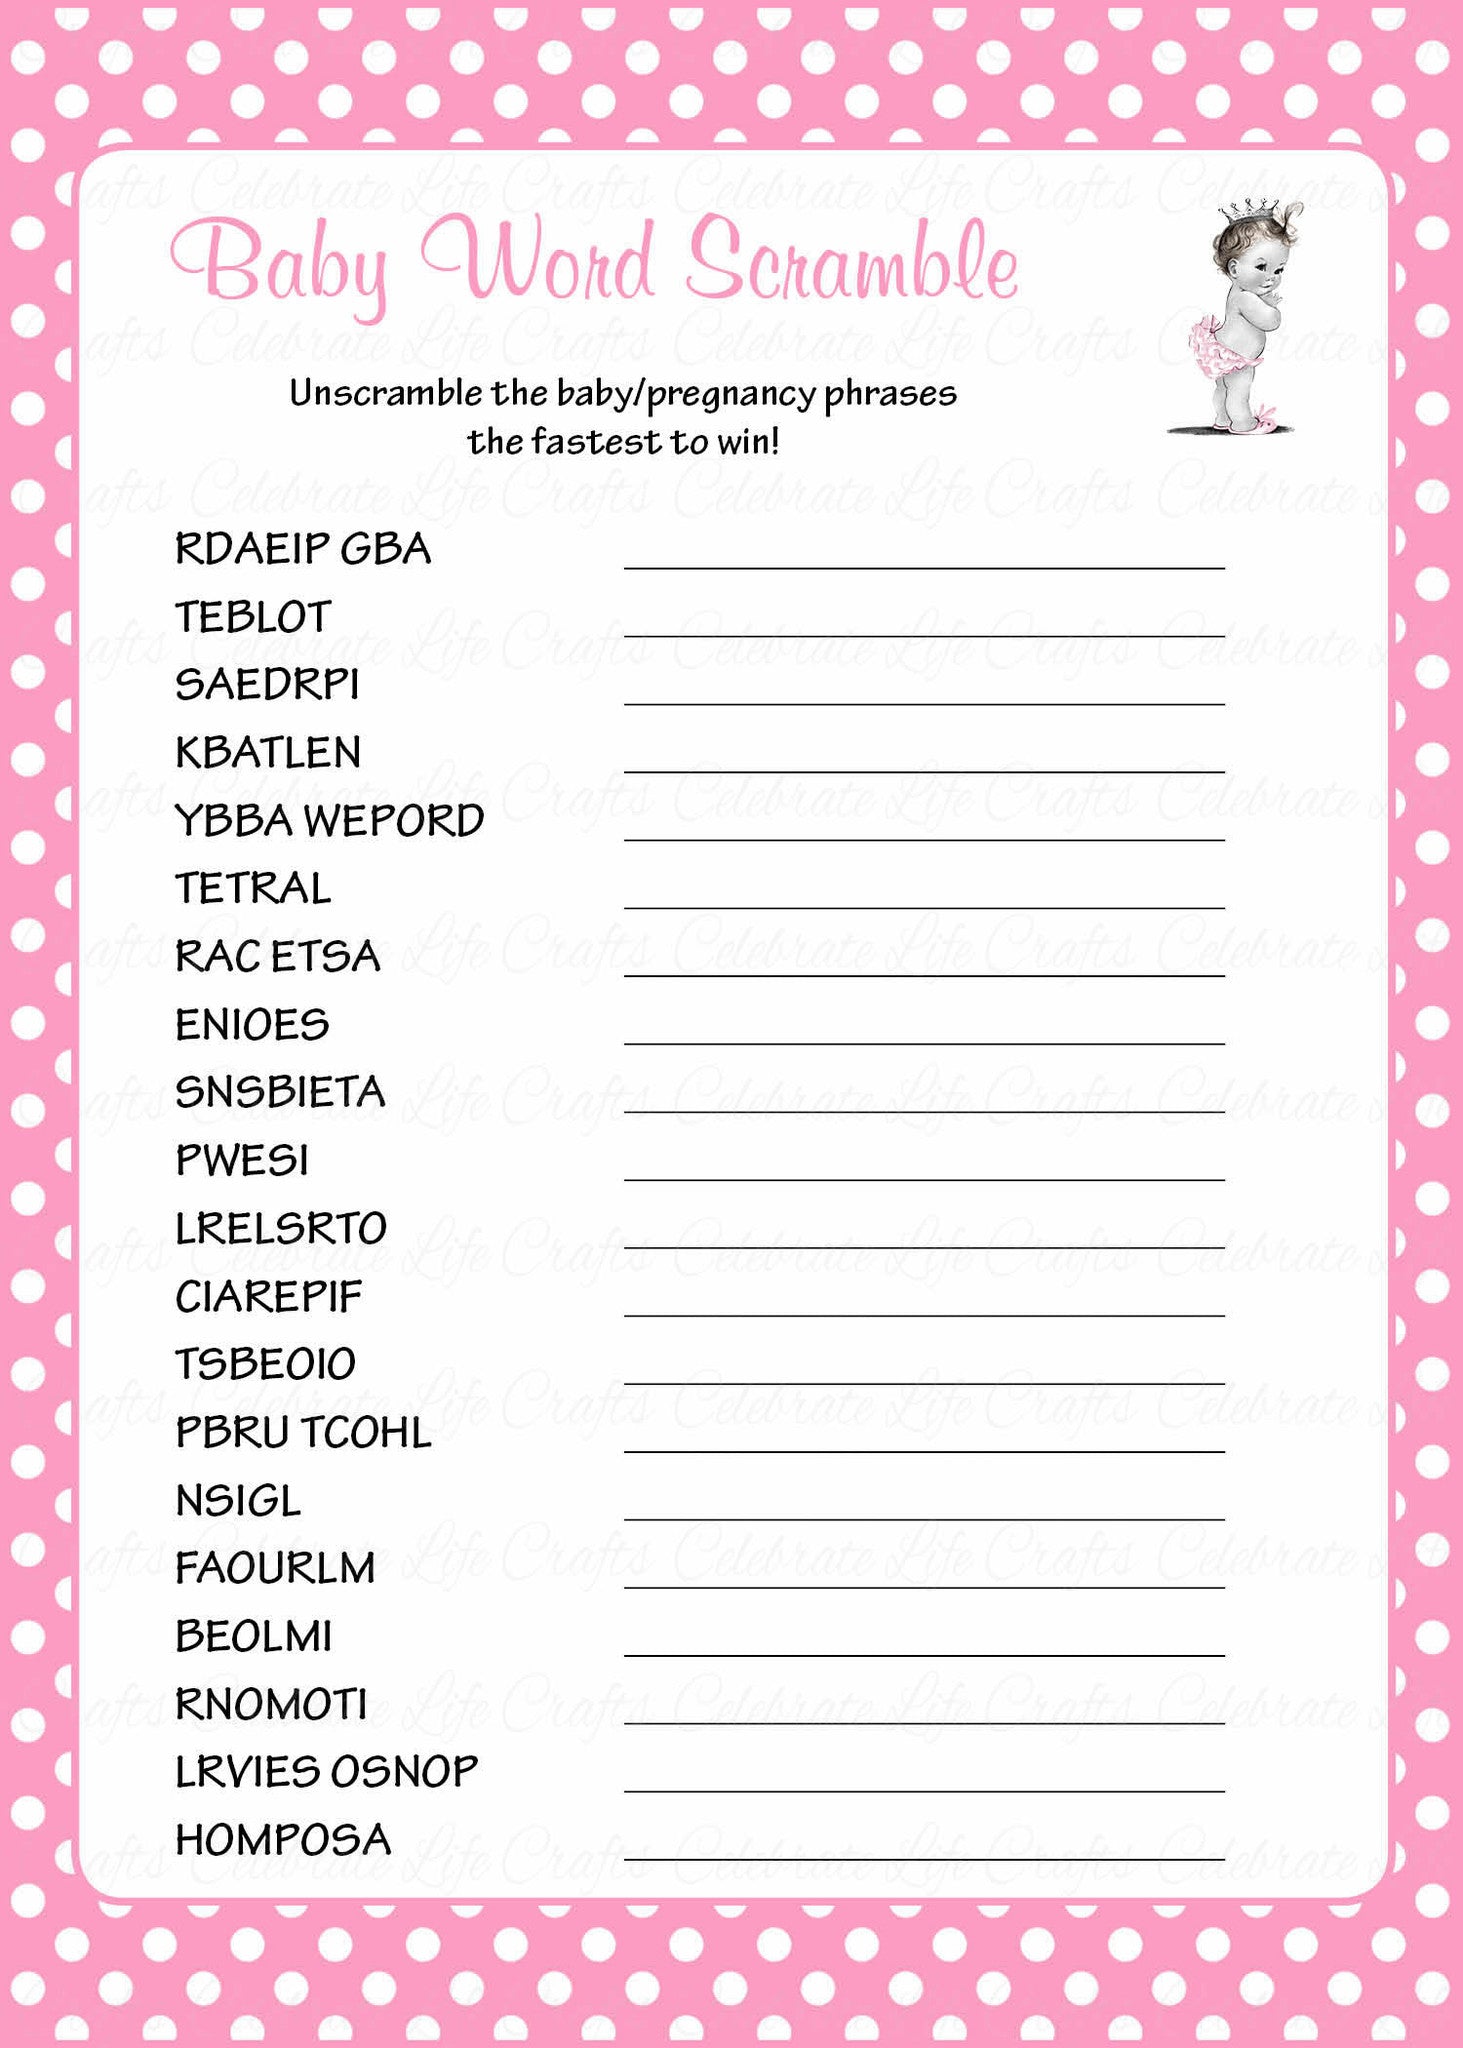 word-scramble-baby-shower-game-princess-baby-shower-theme-for-baby